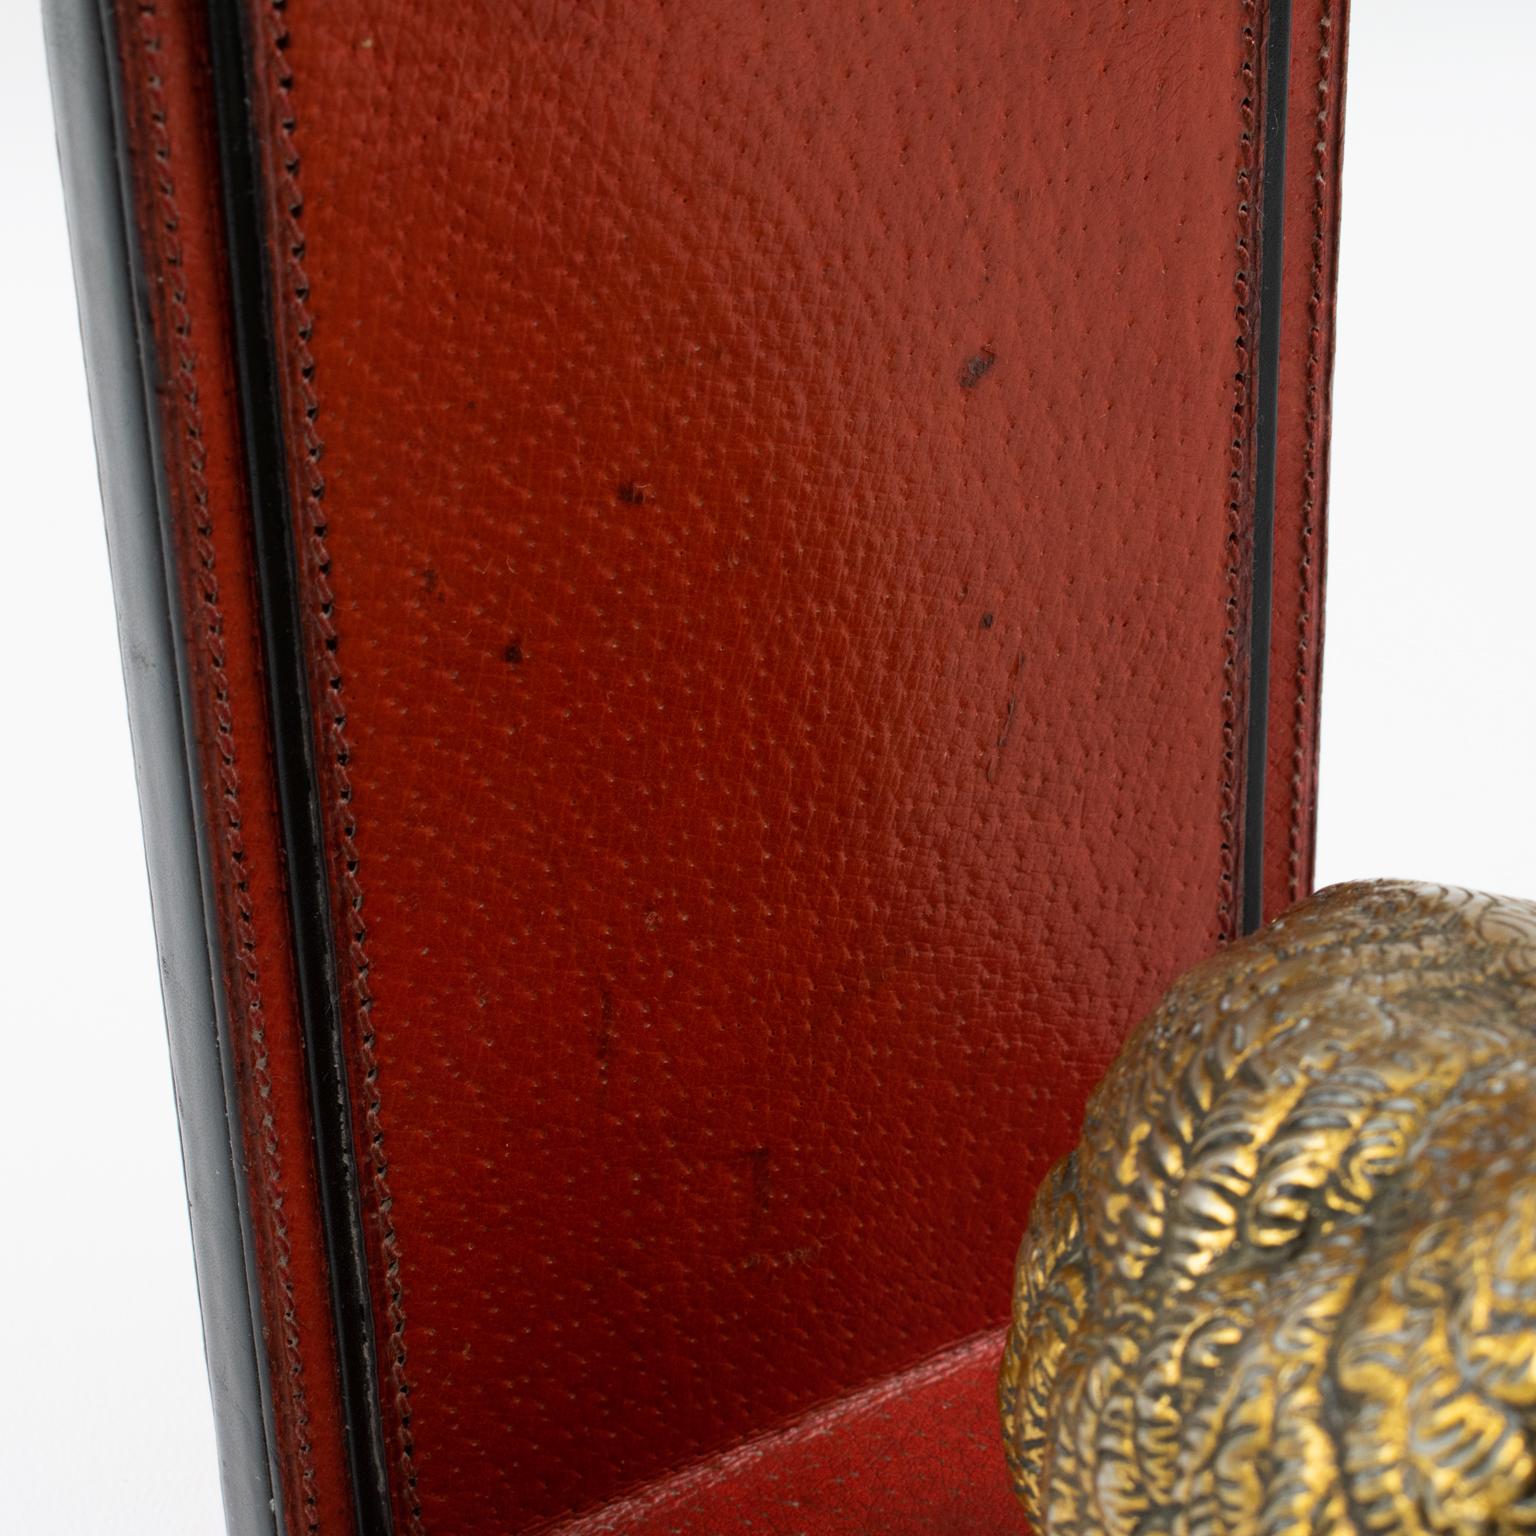 Gucci Italy Hand-Stitched Red Leather Bookends with Gilt Metal Partridges, 1970s For Sale 14